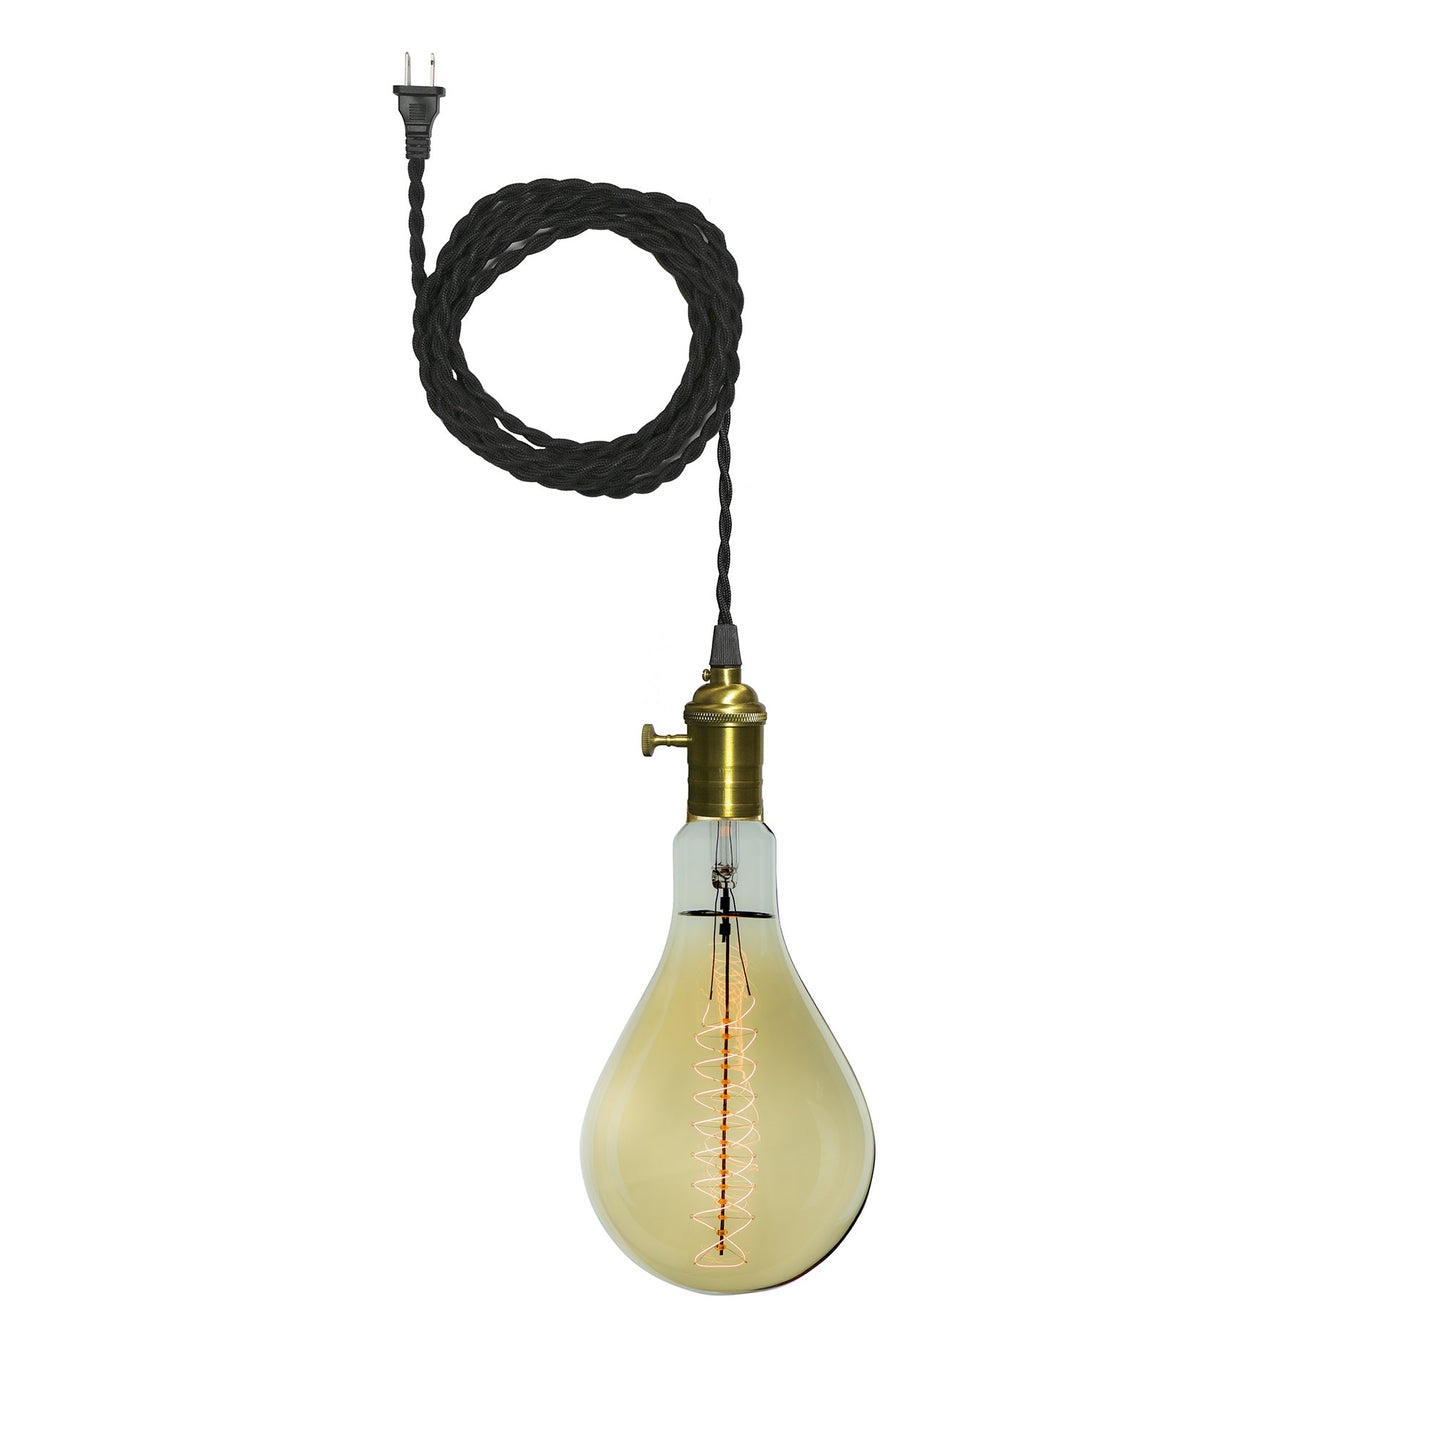 BULBRITE FIXTURES PLUG IN PENDANT KIT VINTAGE BRONZE SOCKET WITH BLACK CORD AND INCANDESCENT PS56 MEDIUM SCREW (E26) 60W NON-DIMMABLE ANTIQUE LIGHT BULB 2200K/AMBER 1PK (810013)